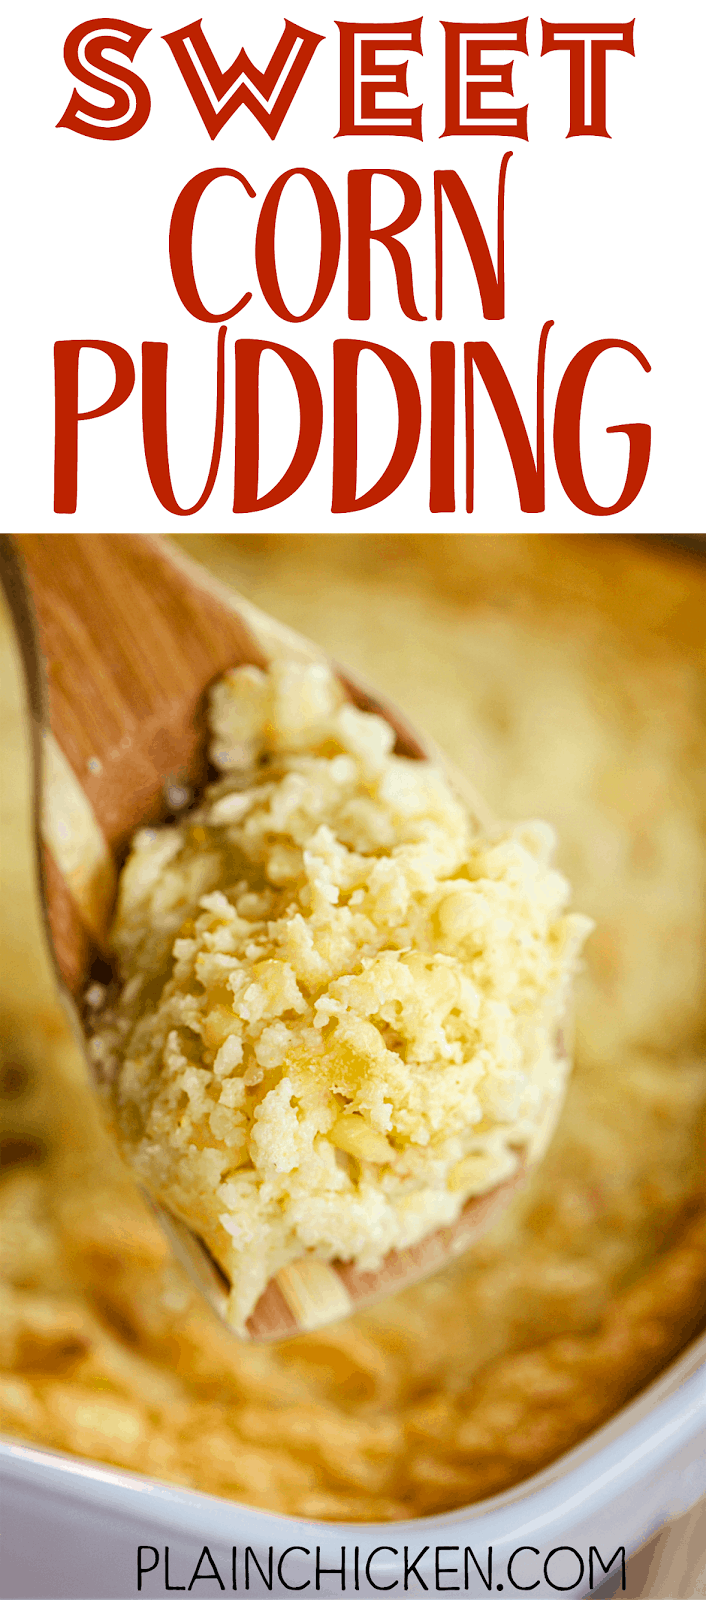 Sweet Corn Pudding - a family favorite! Fresh bread crumbs, cornmeal mix, sugar, eggs, milk, half-and-half, butter and frozen cream-style corn. This tastes AMAZING!! Great anytime of year. We love it with grilled chicken, pork chops, steak and BBQ. It is the perfect side dish for the holidays too!